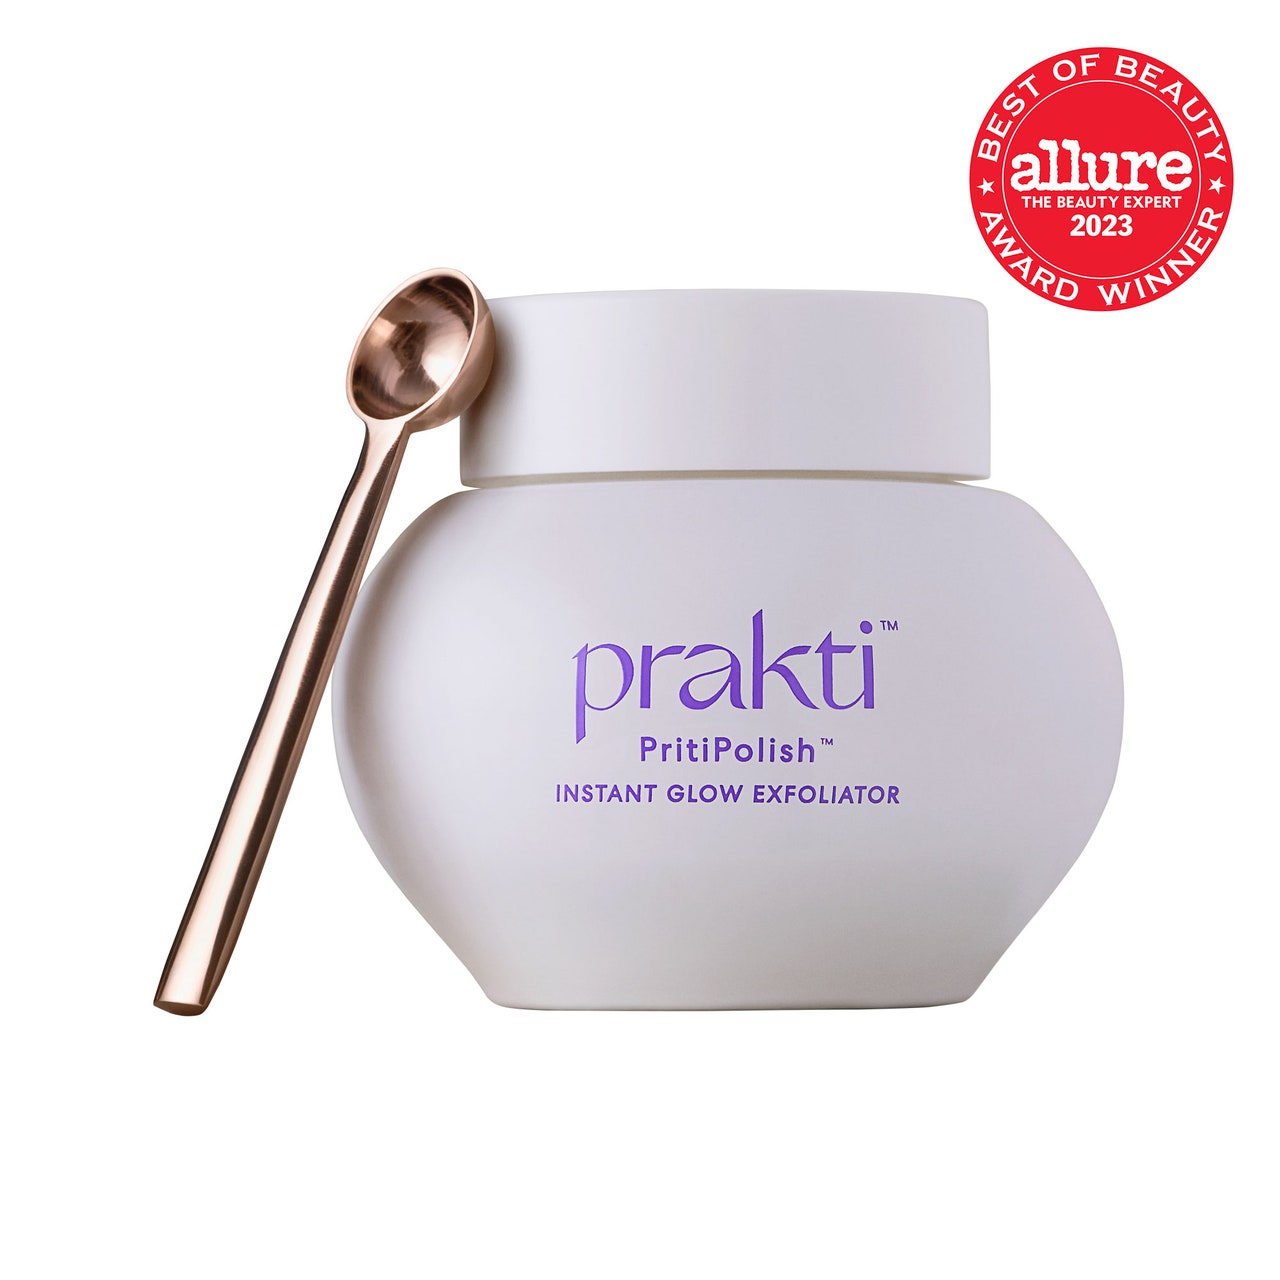 Prakti PritiPolish round white jar with gold spoon leaning against it on white background with red Allure BoB seal in the top right corner